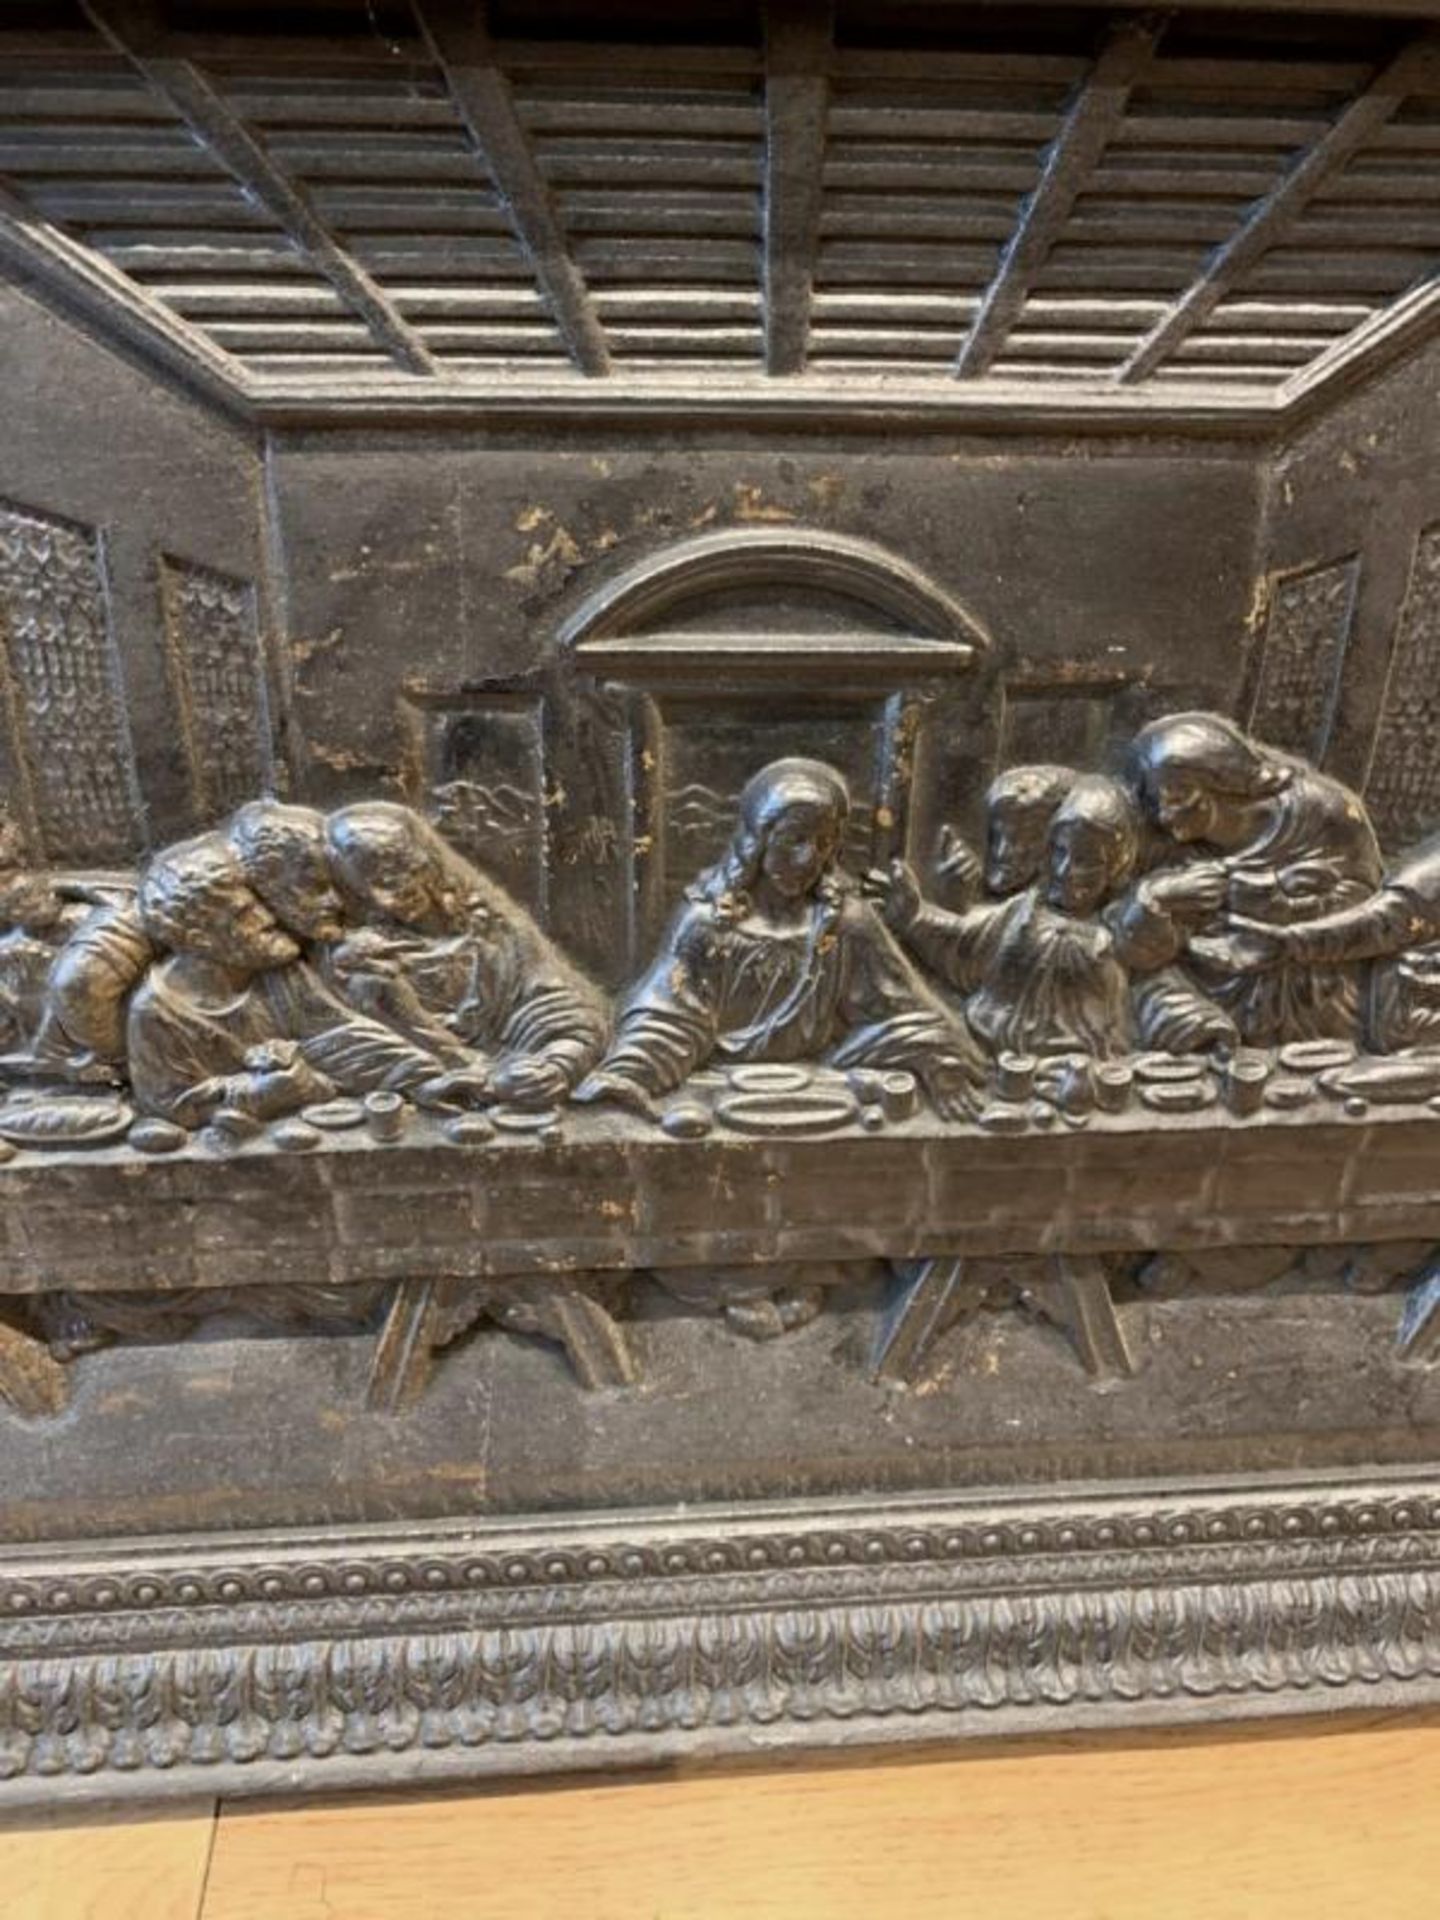 1 x Heavy Solid Cast Iron Rectangular Sculpture Featuring The Famous 'Last Supper' Scene - - Image 7 of 14